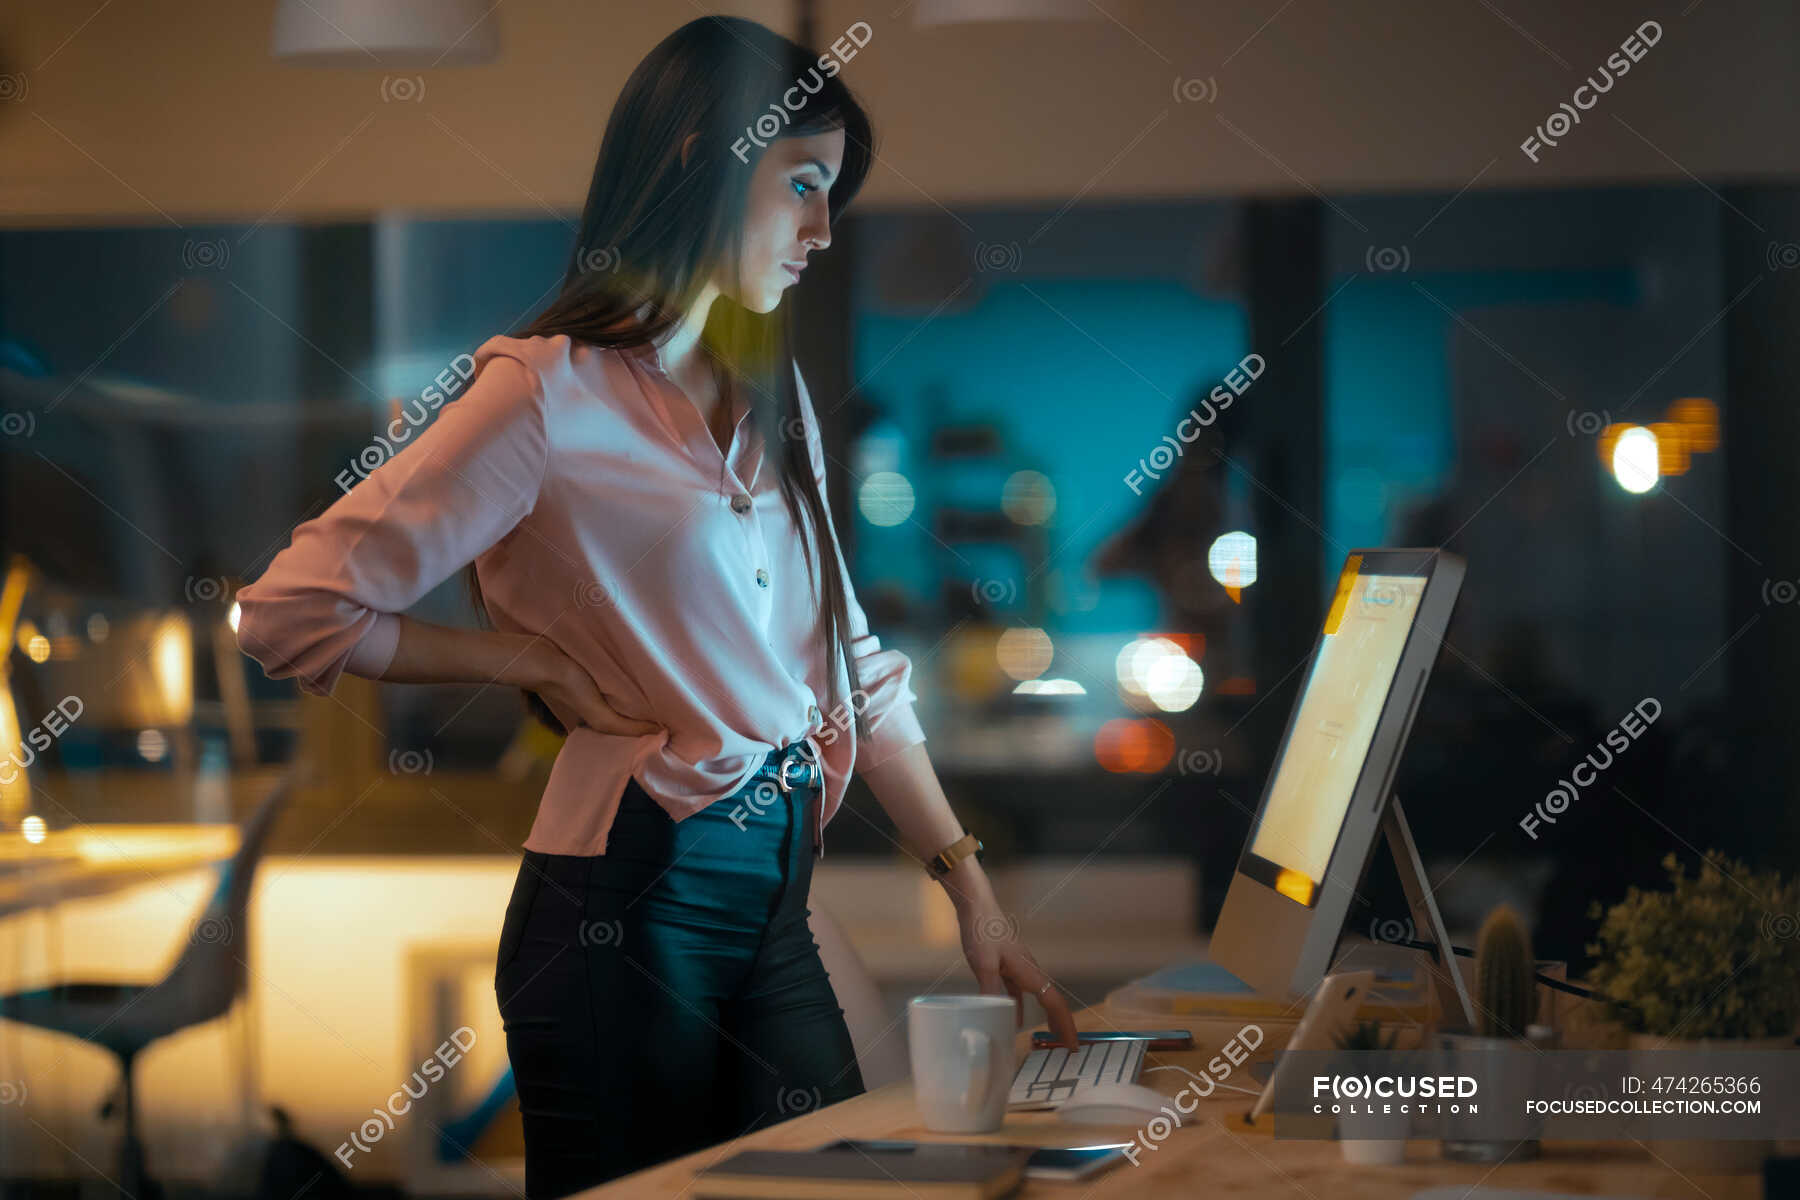 Serious young woman standing at desk in office looking at computer —  technology, businesswoman - Stock Photo | #474265366